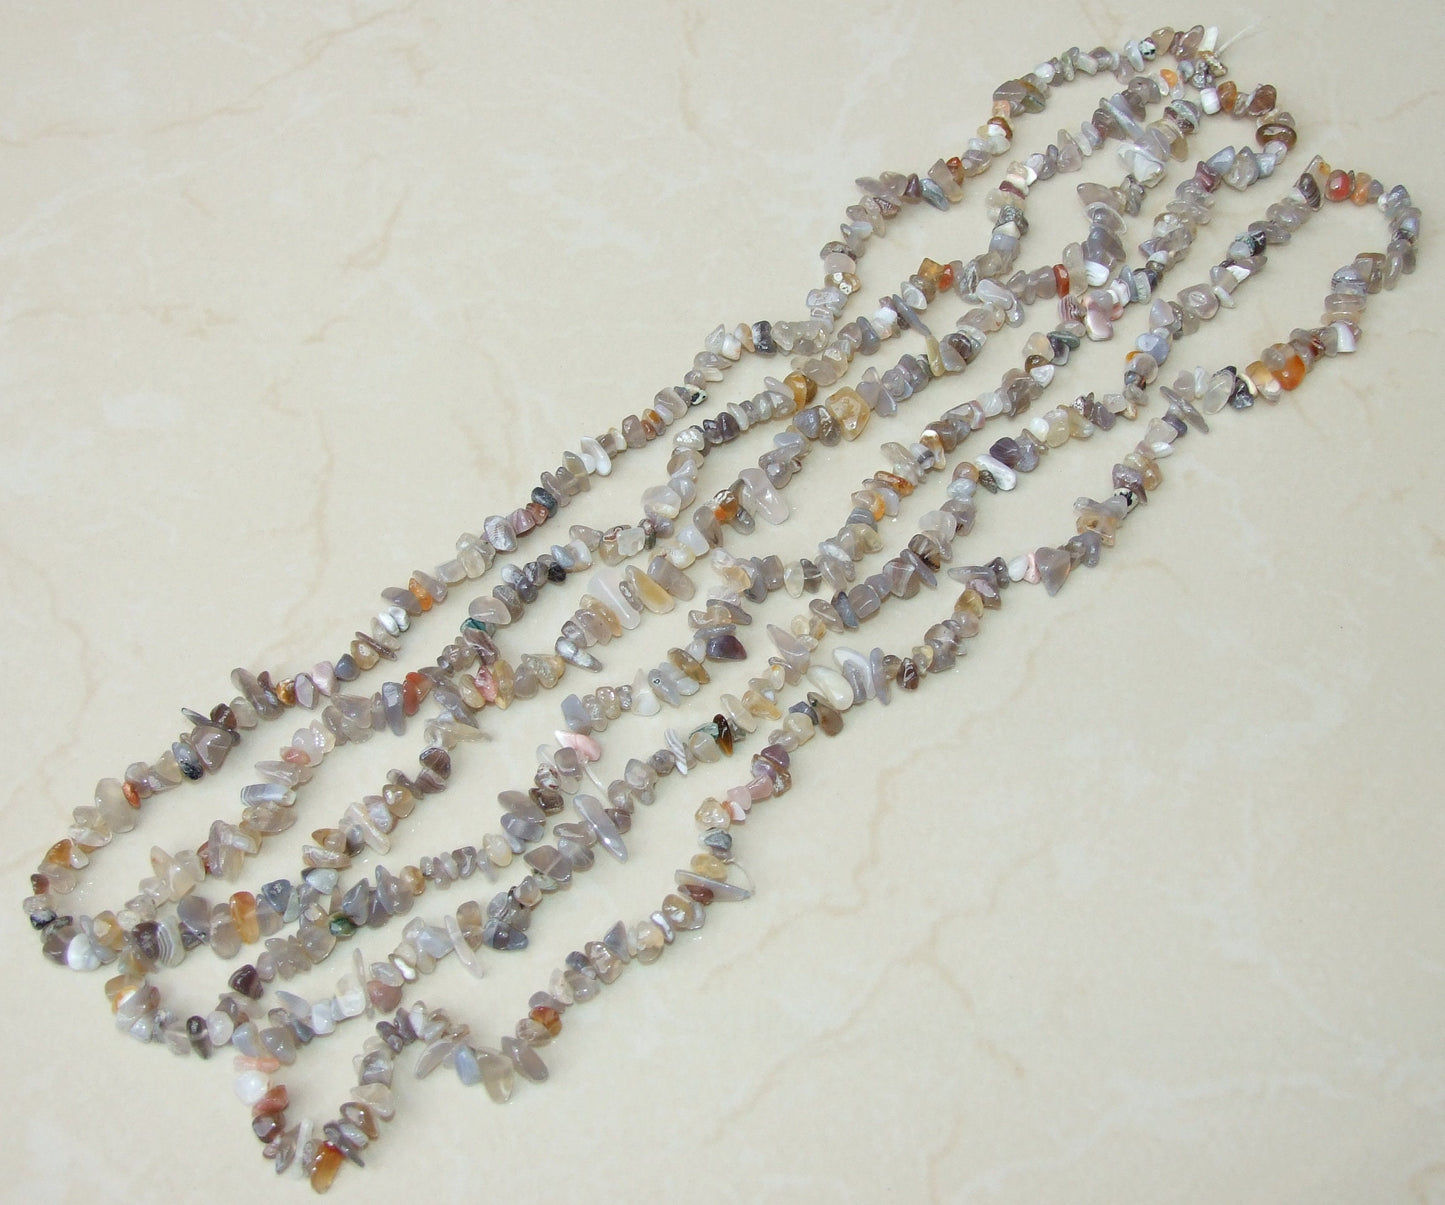 Small Agate Chips, Polished Agate, Agate Beads, Gemstone Beads, Jewelry Stones, Natural Agate, 31.5" Strand,  4mm - 10mm